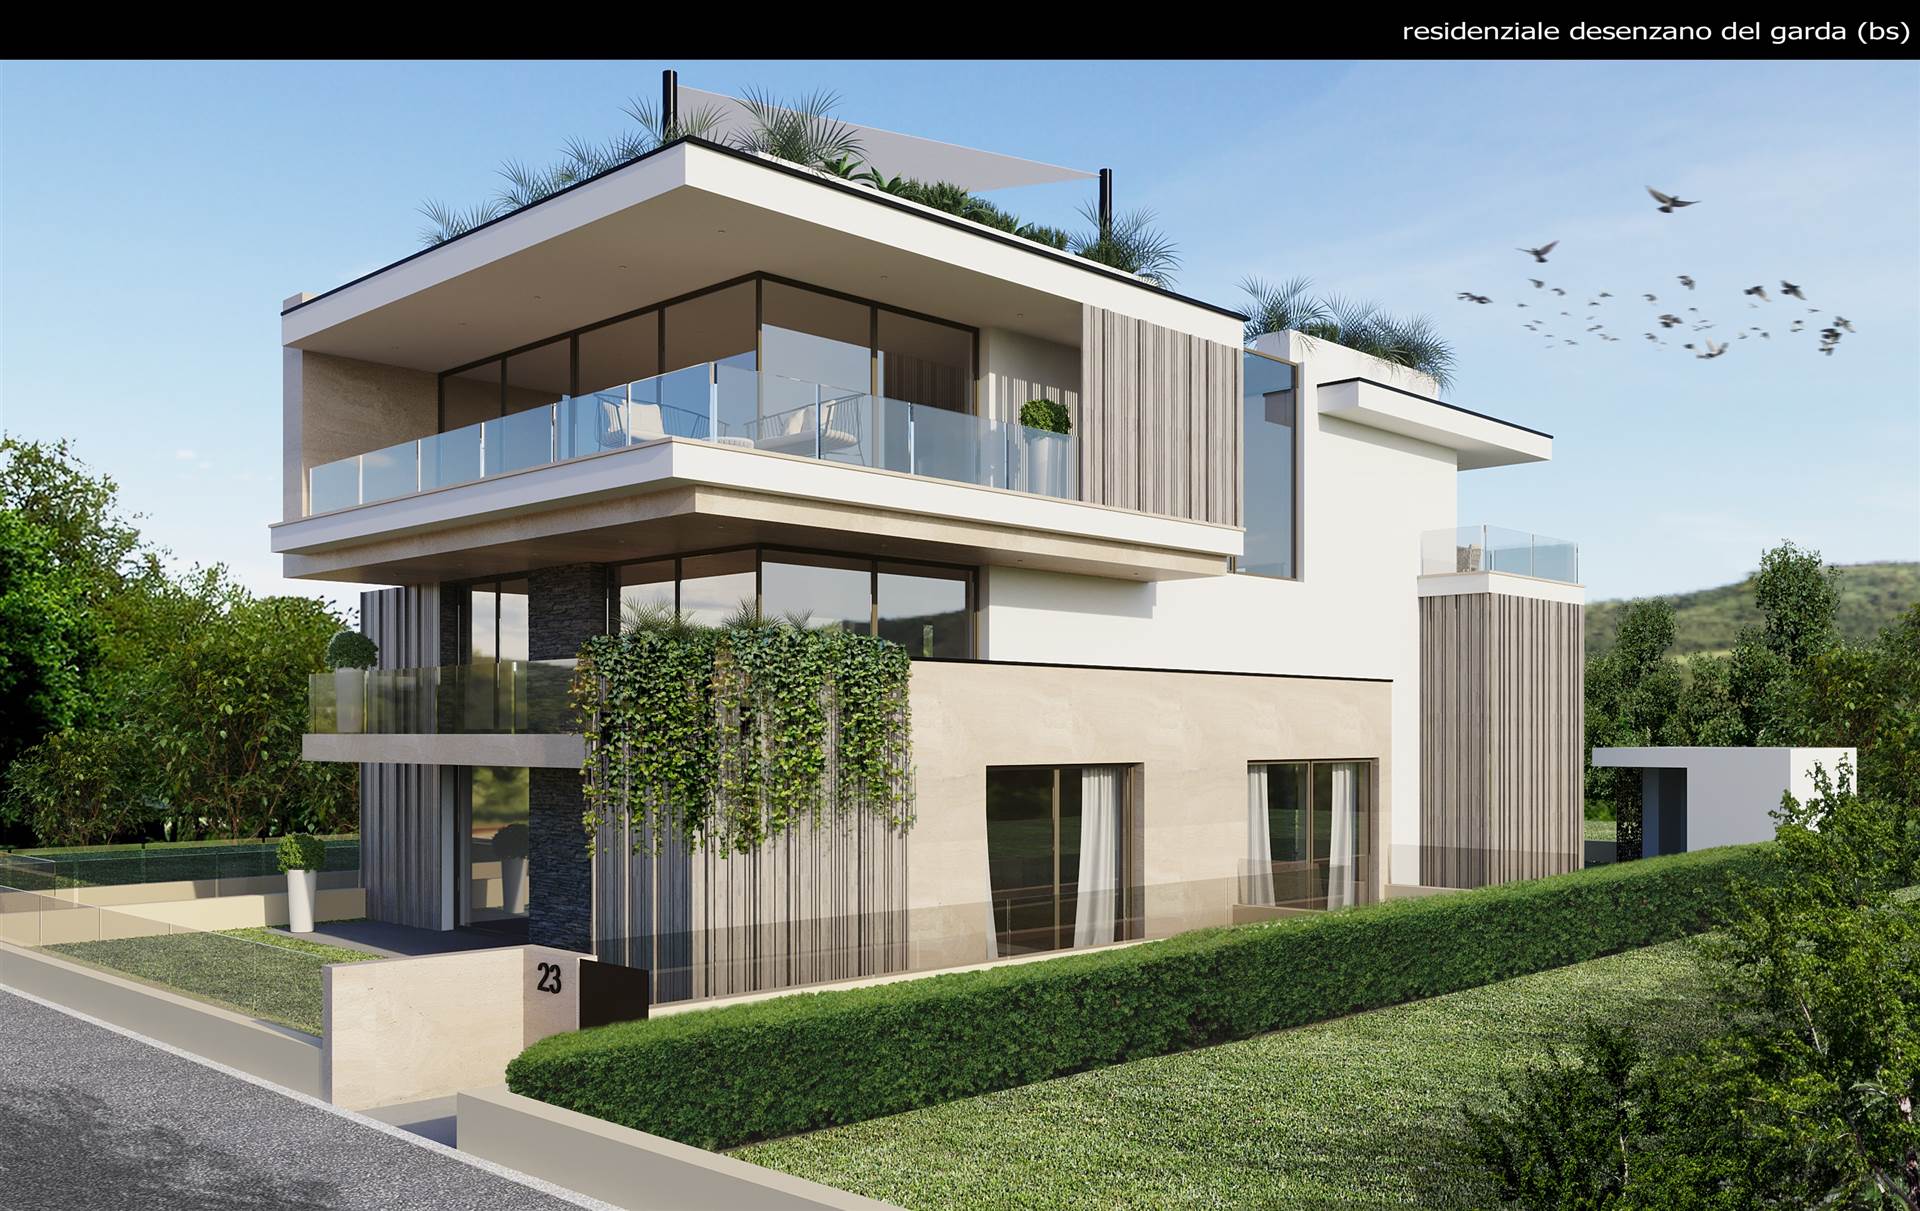 DESENZANO DEL GARDA, Apartment for sale of 77 Sq. mt., New construction, Heating Individual heating system, Energetic class: A+, placed at 1° on 2, composed by: 3 Rooms, Kitchenette, , 2 Bedrooms, 1 